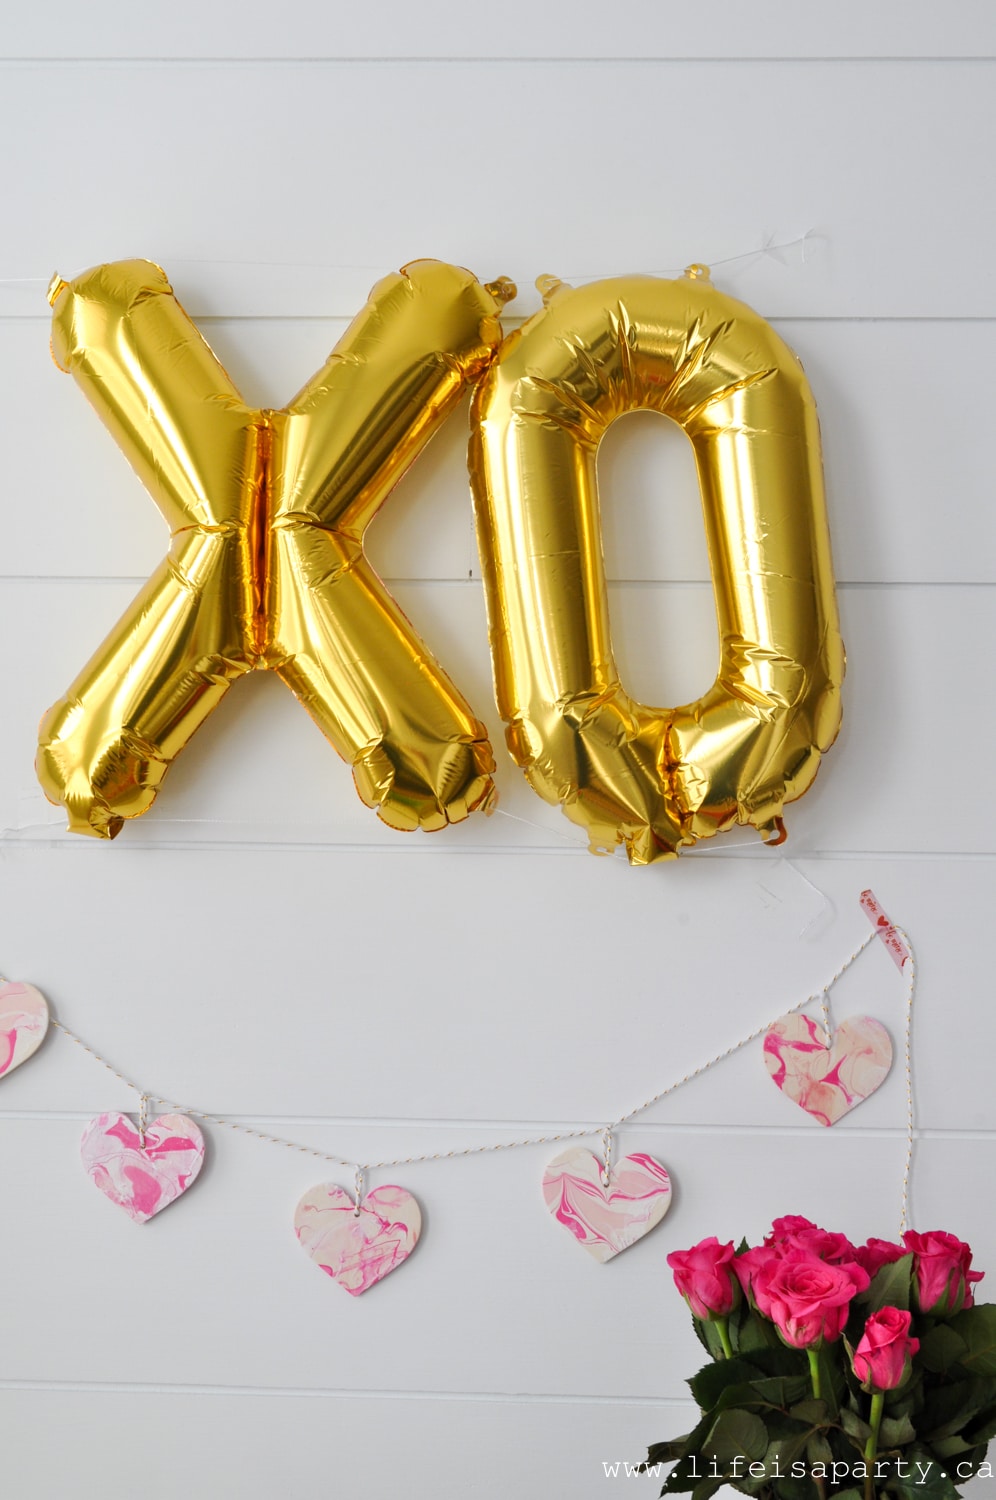 Galentine's Day XO balloons, heart garland and pink roses